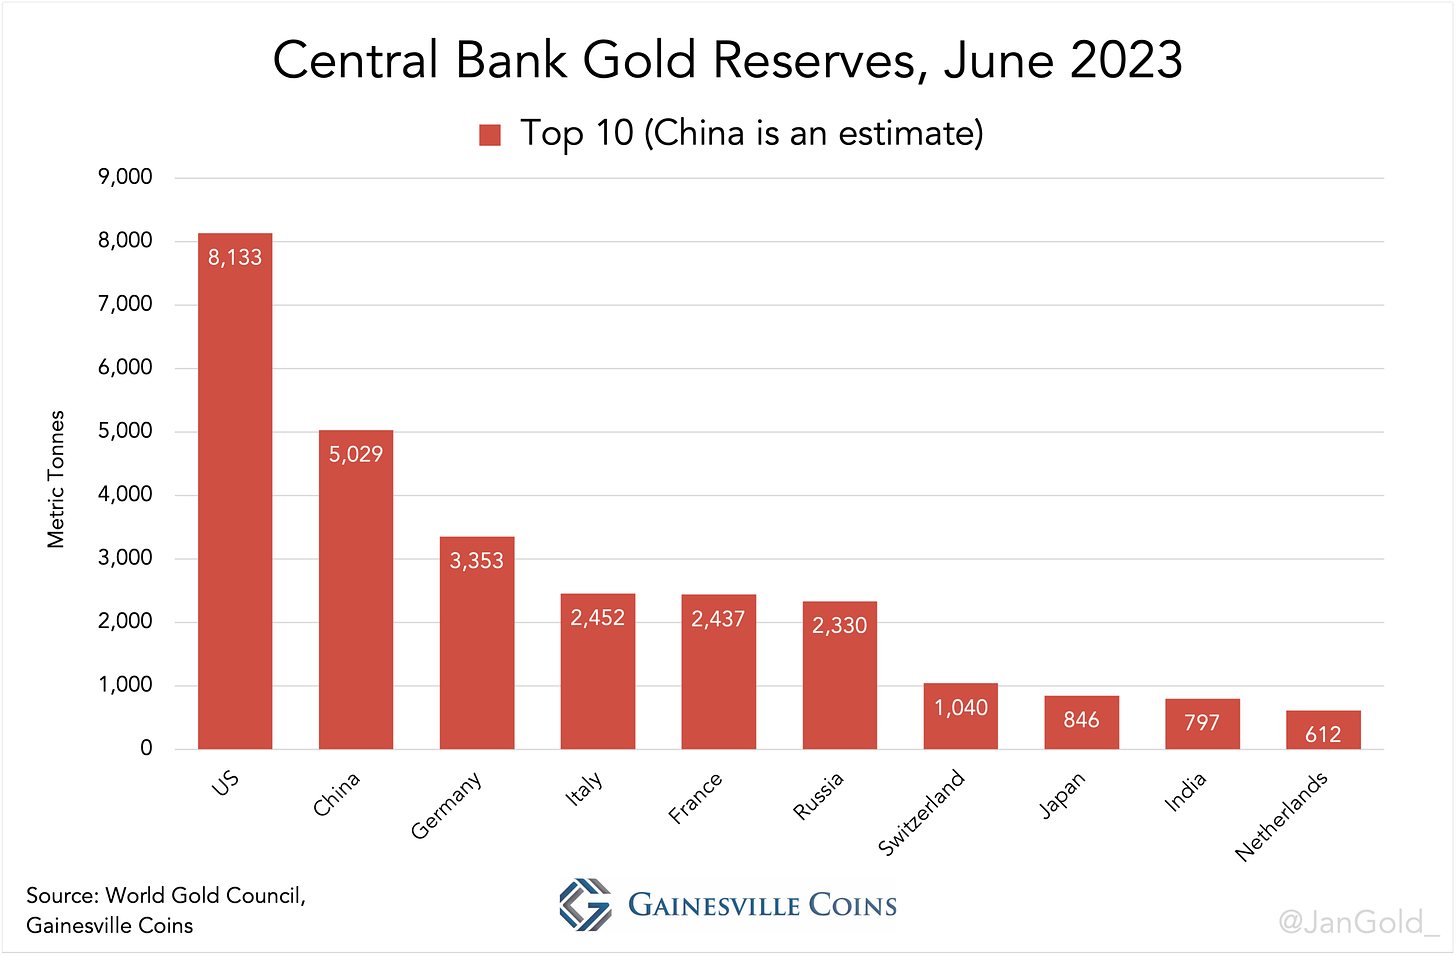 chart showing central bank gold reserves of various countries, June 2023